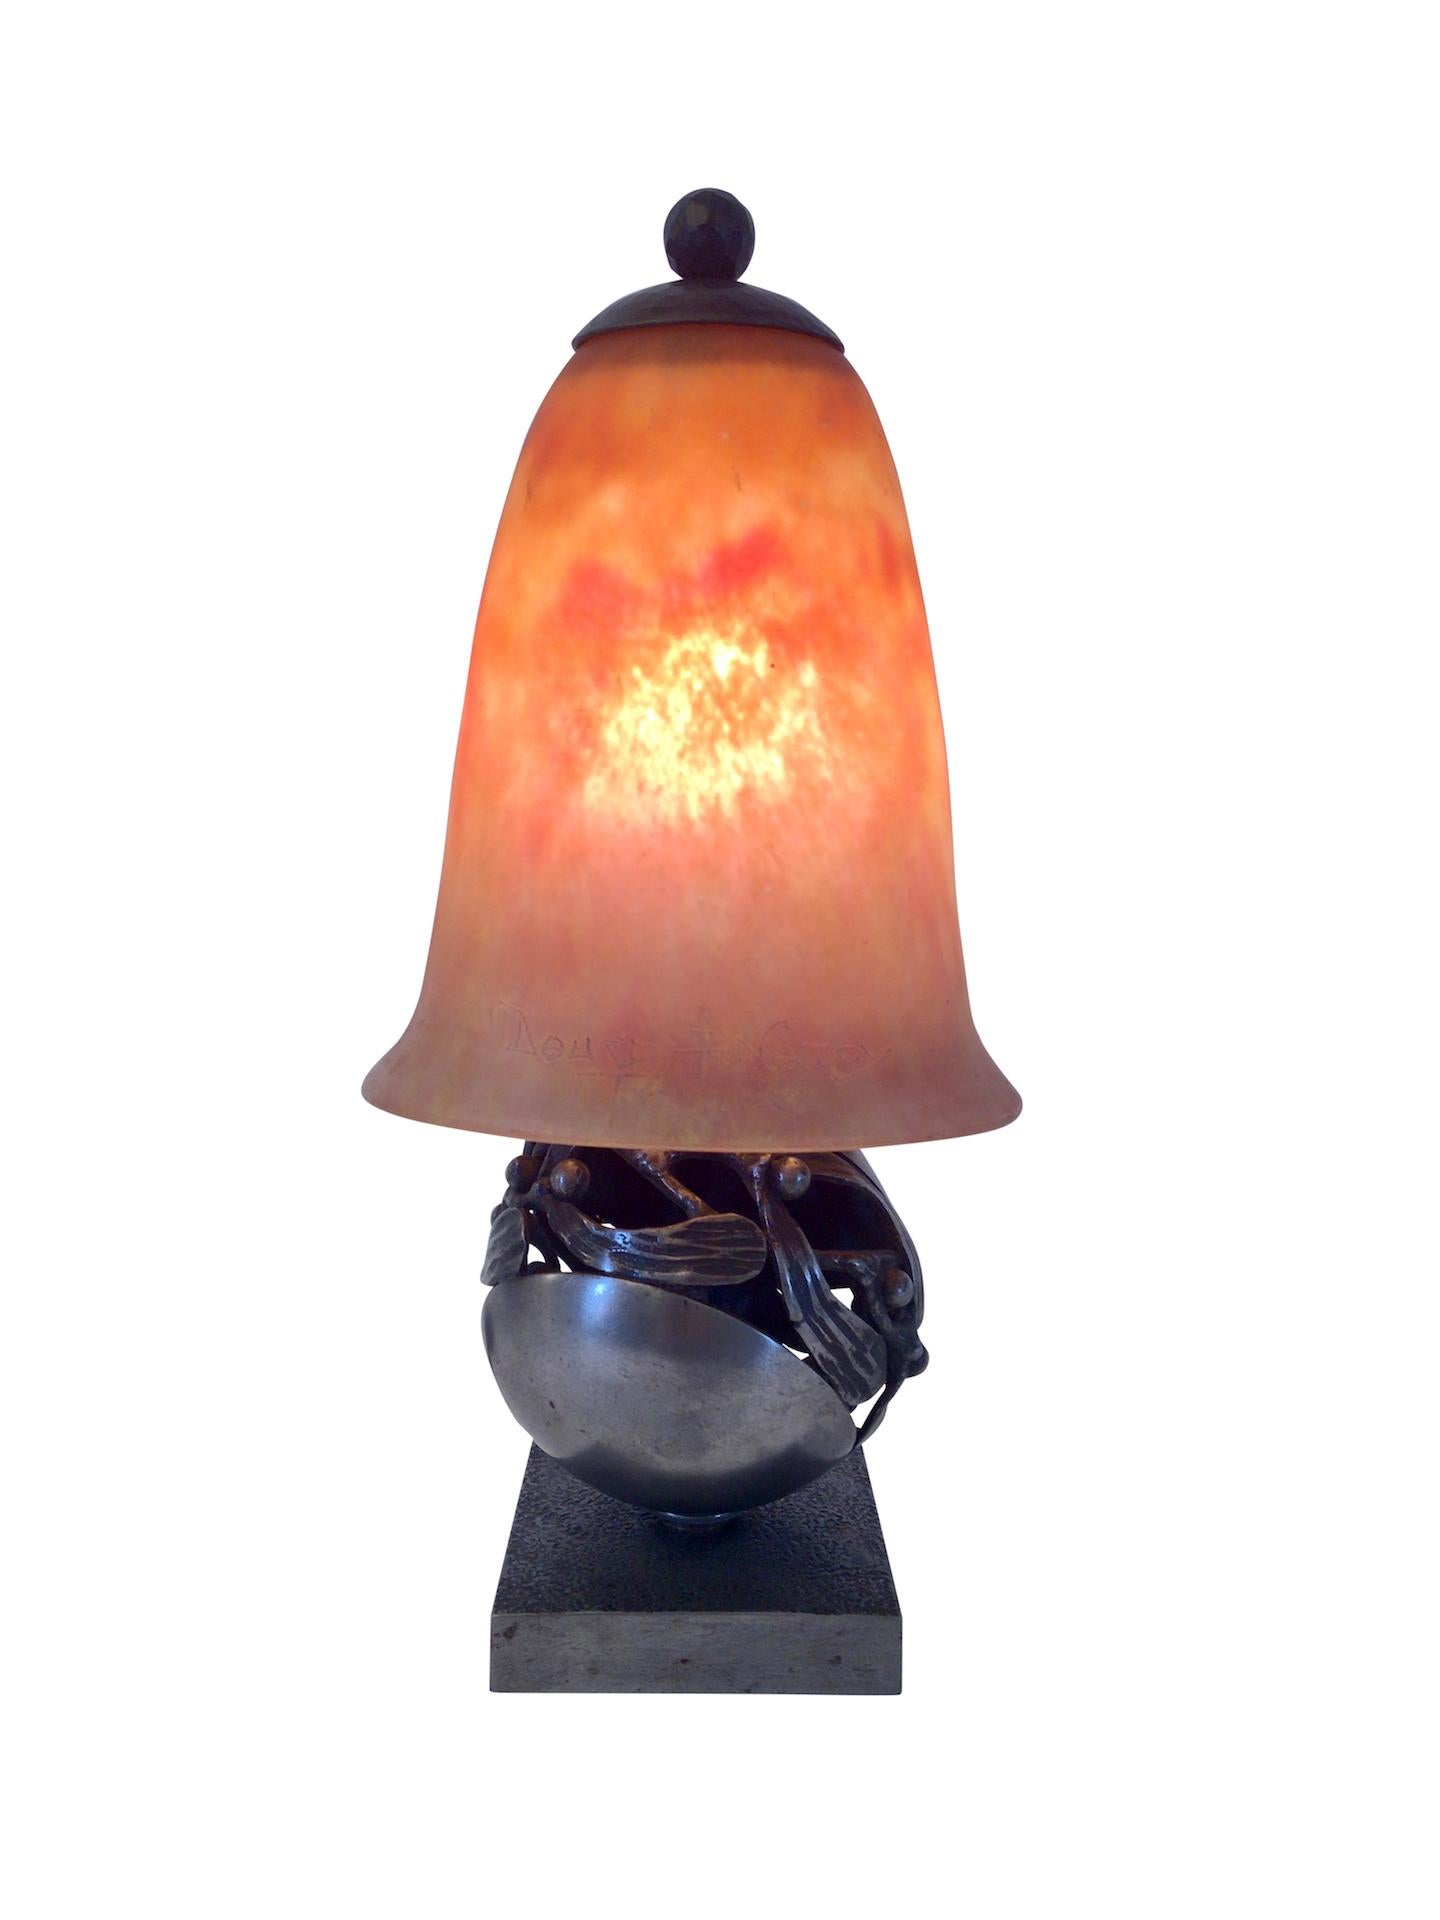 Beautiful little table lamp with powdered red/orange glass by 